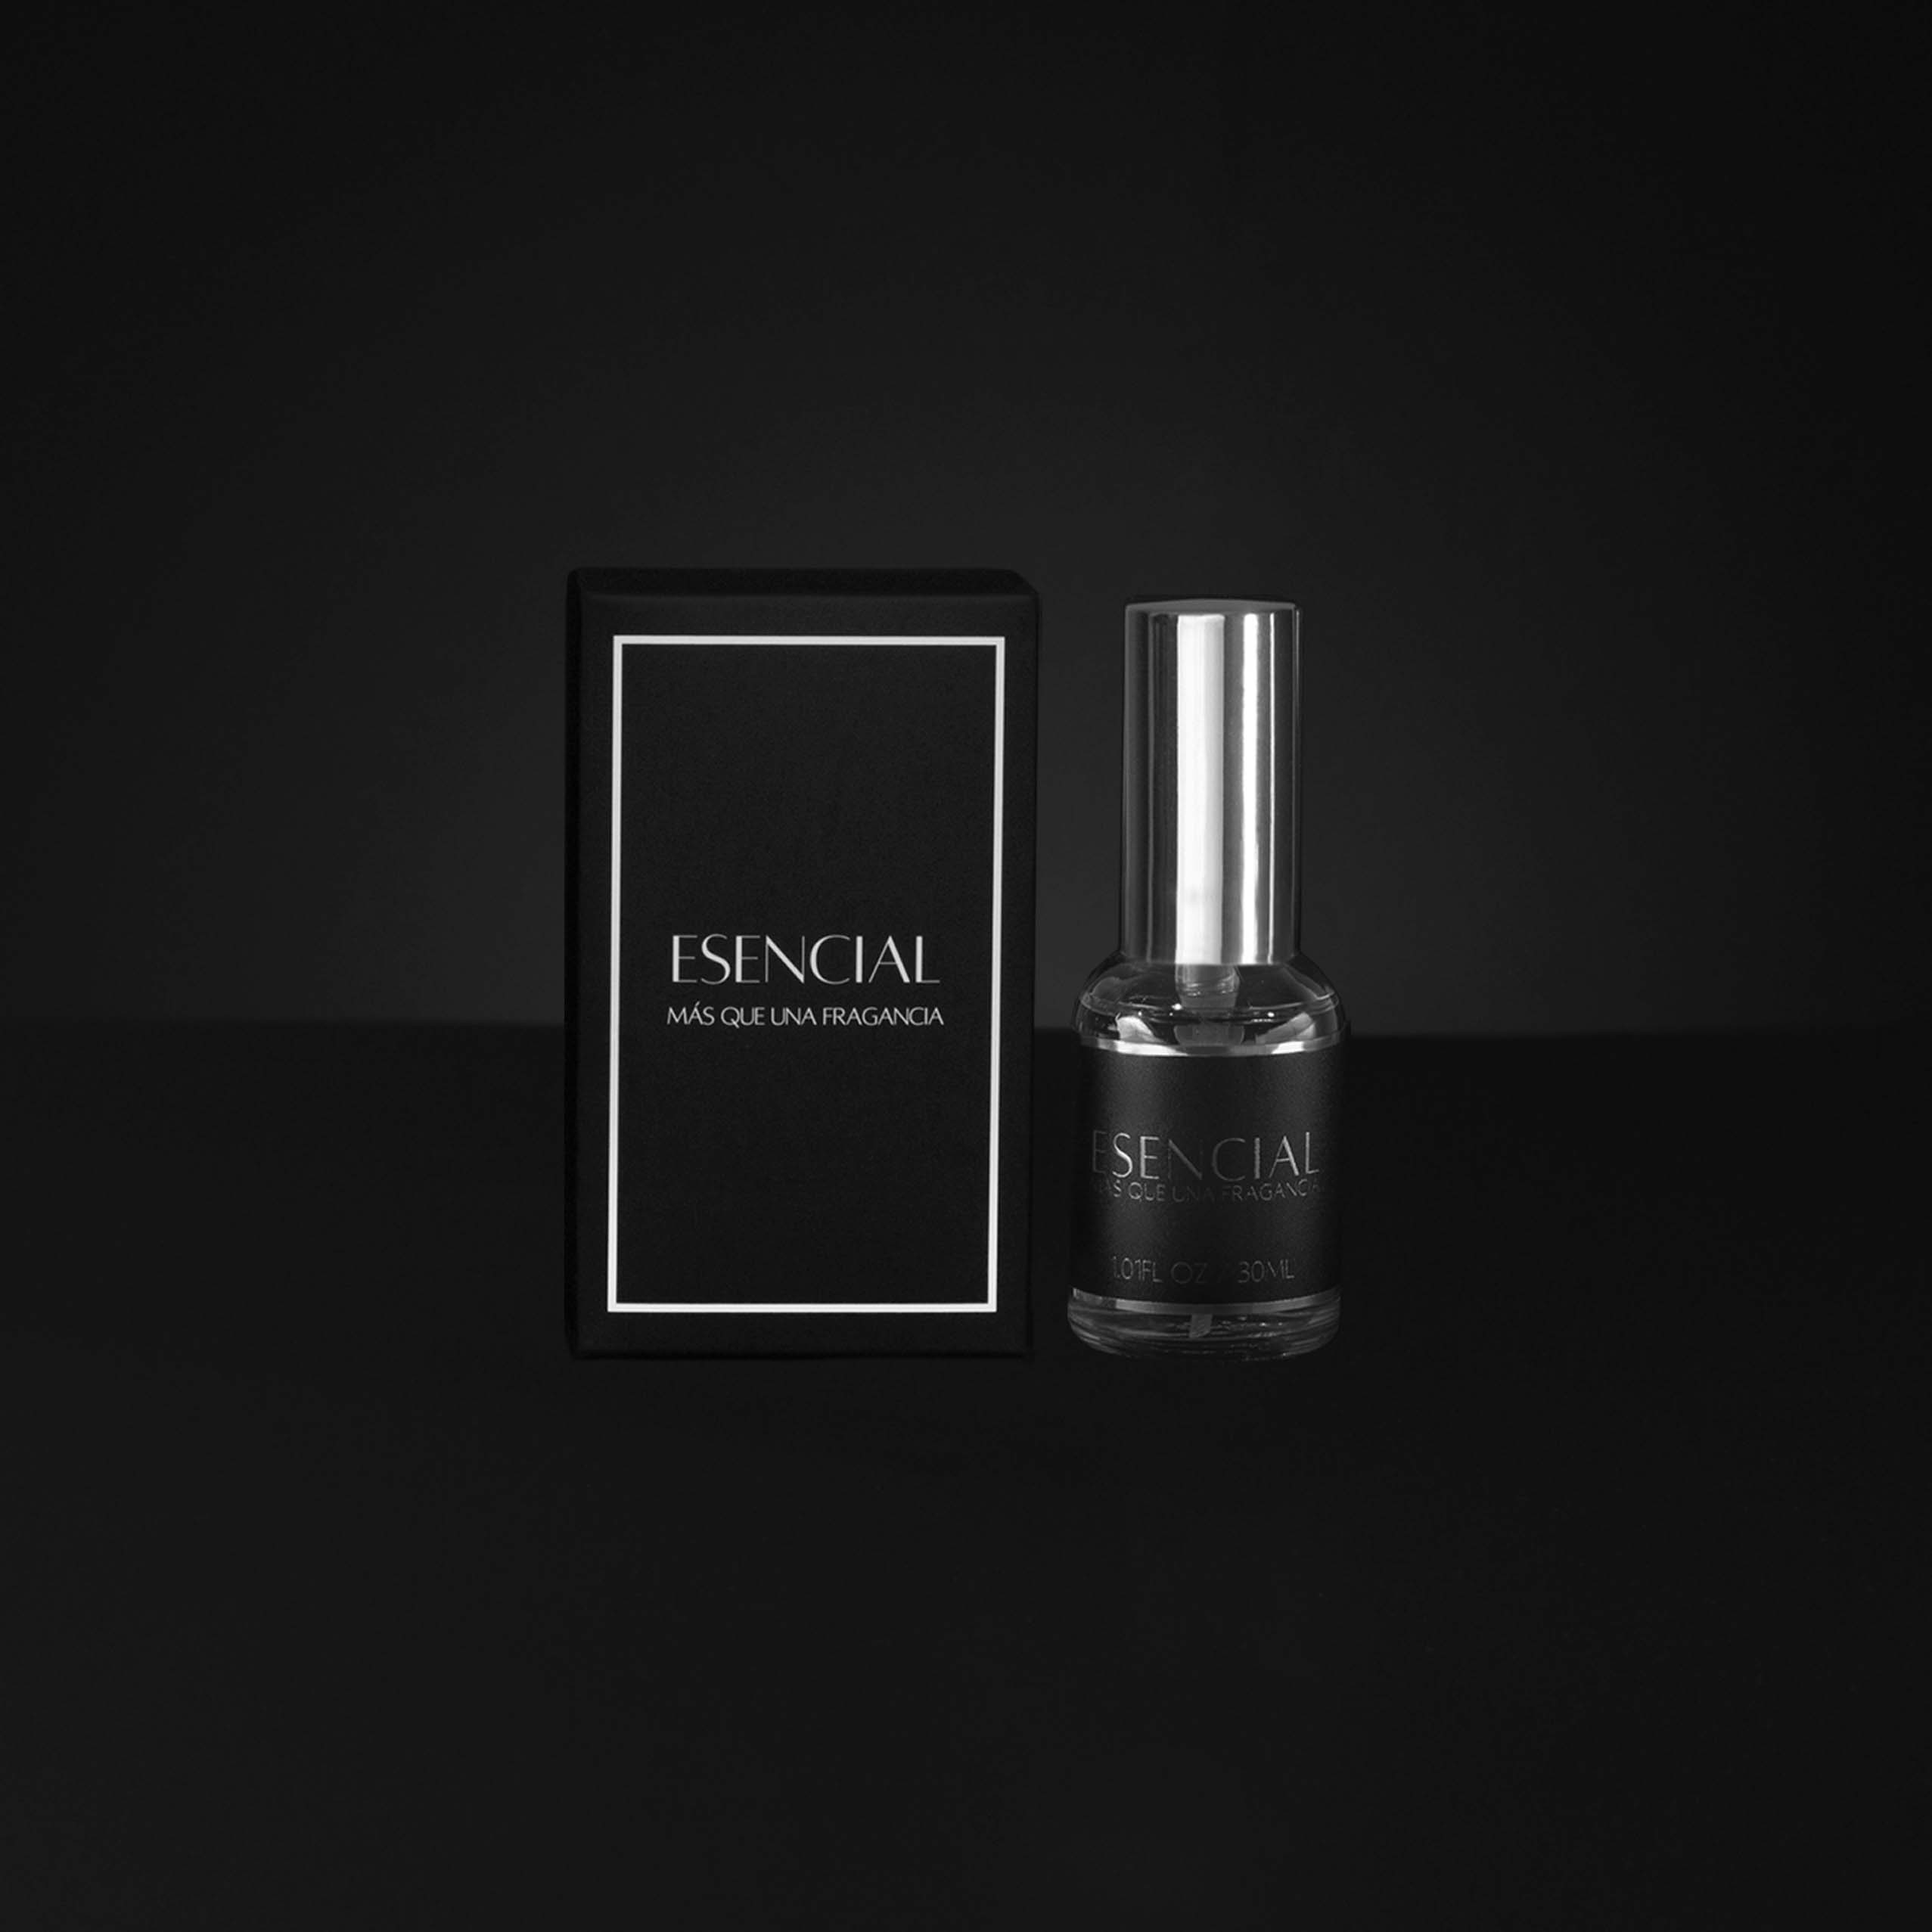 H232 Inspired by: The Noir 29 - Le Labo